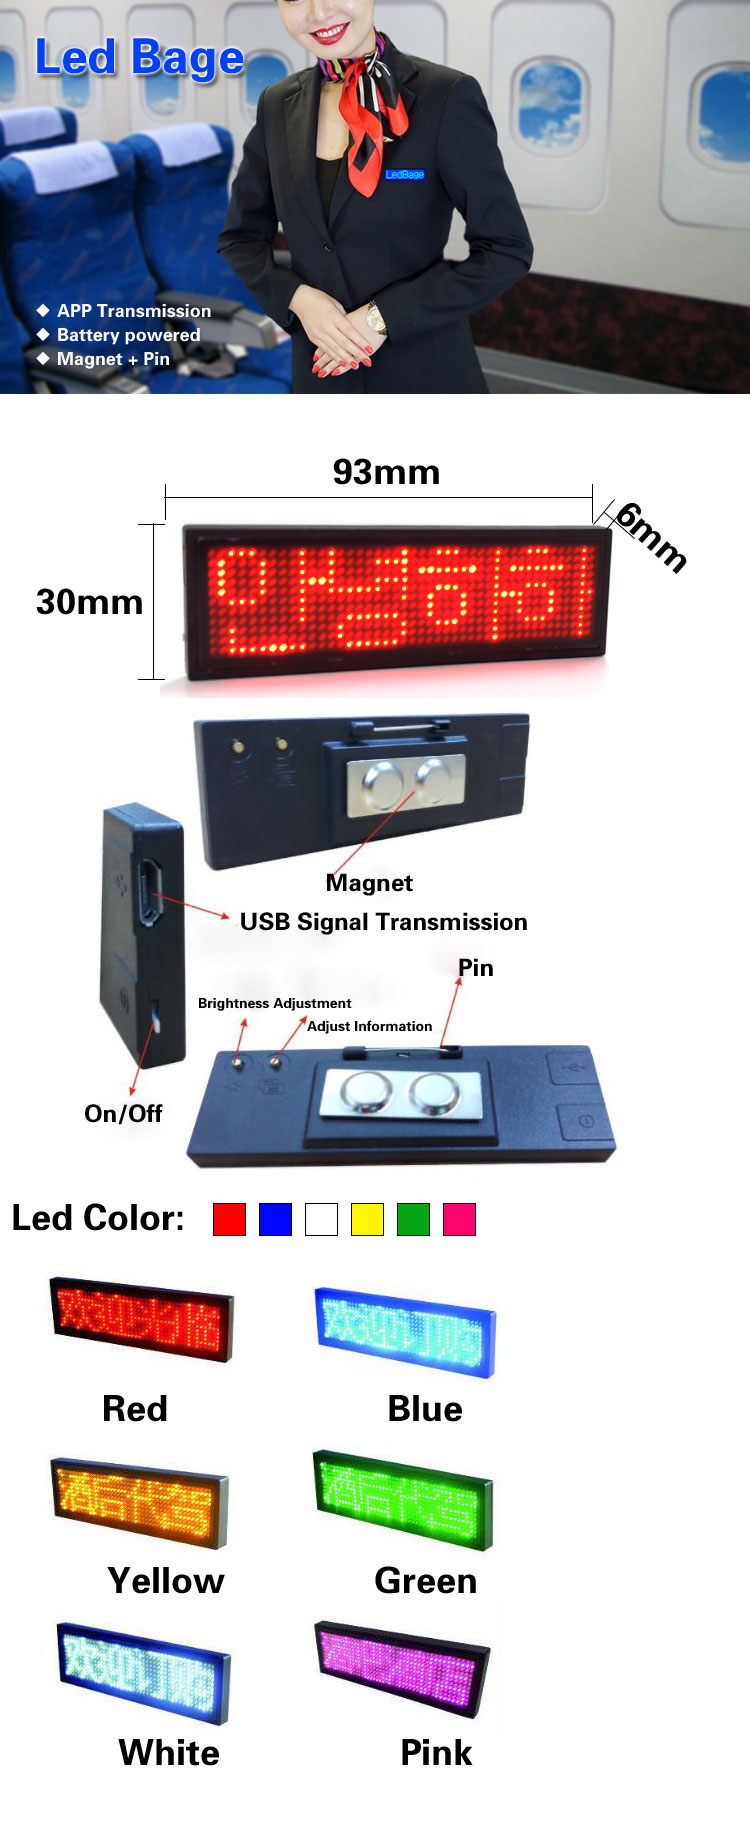 LED Badge Digital Scrolling Message Name Tag, Display Portable Rechargeable LED Pin, Programming USB Business Tag